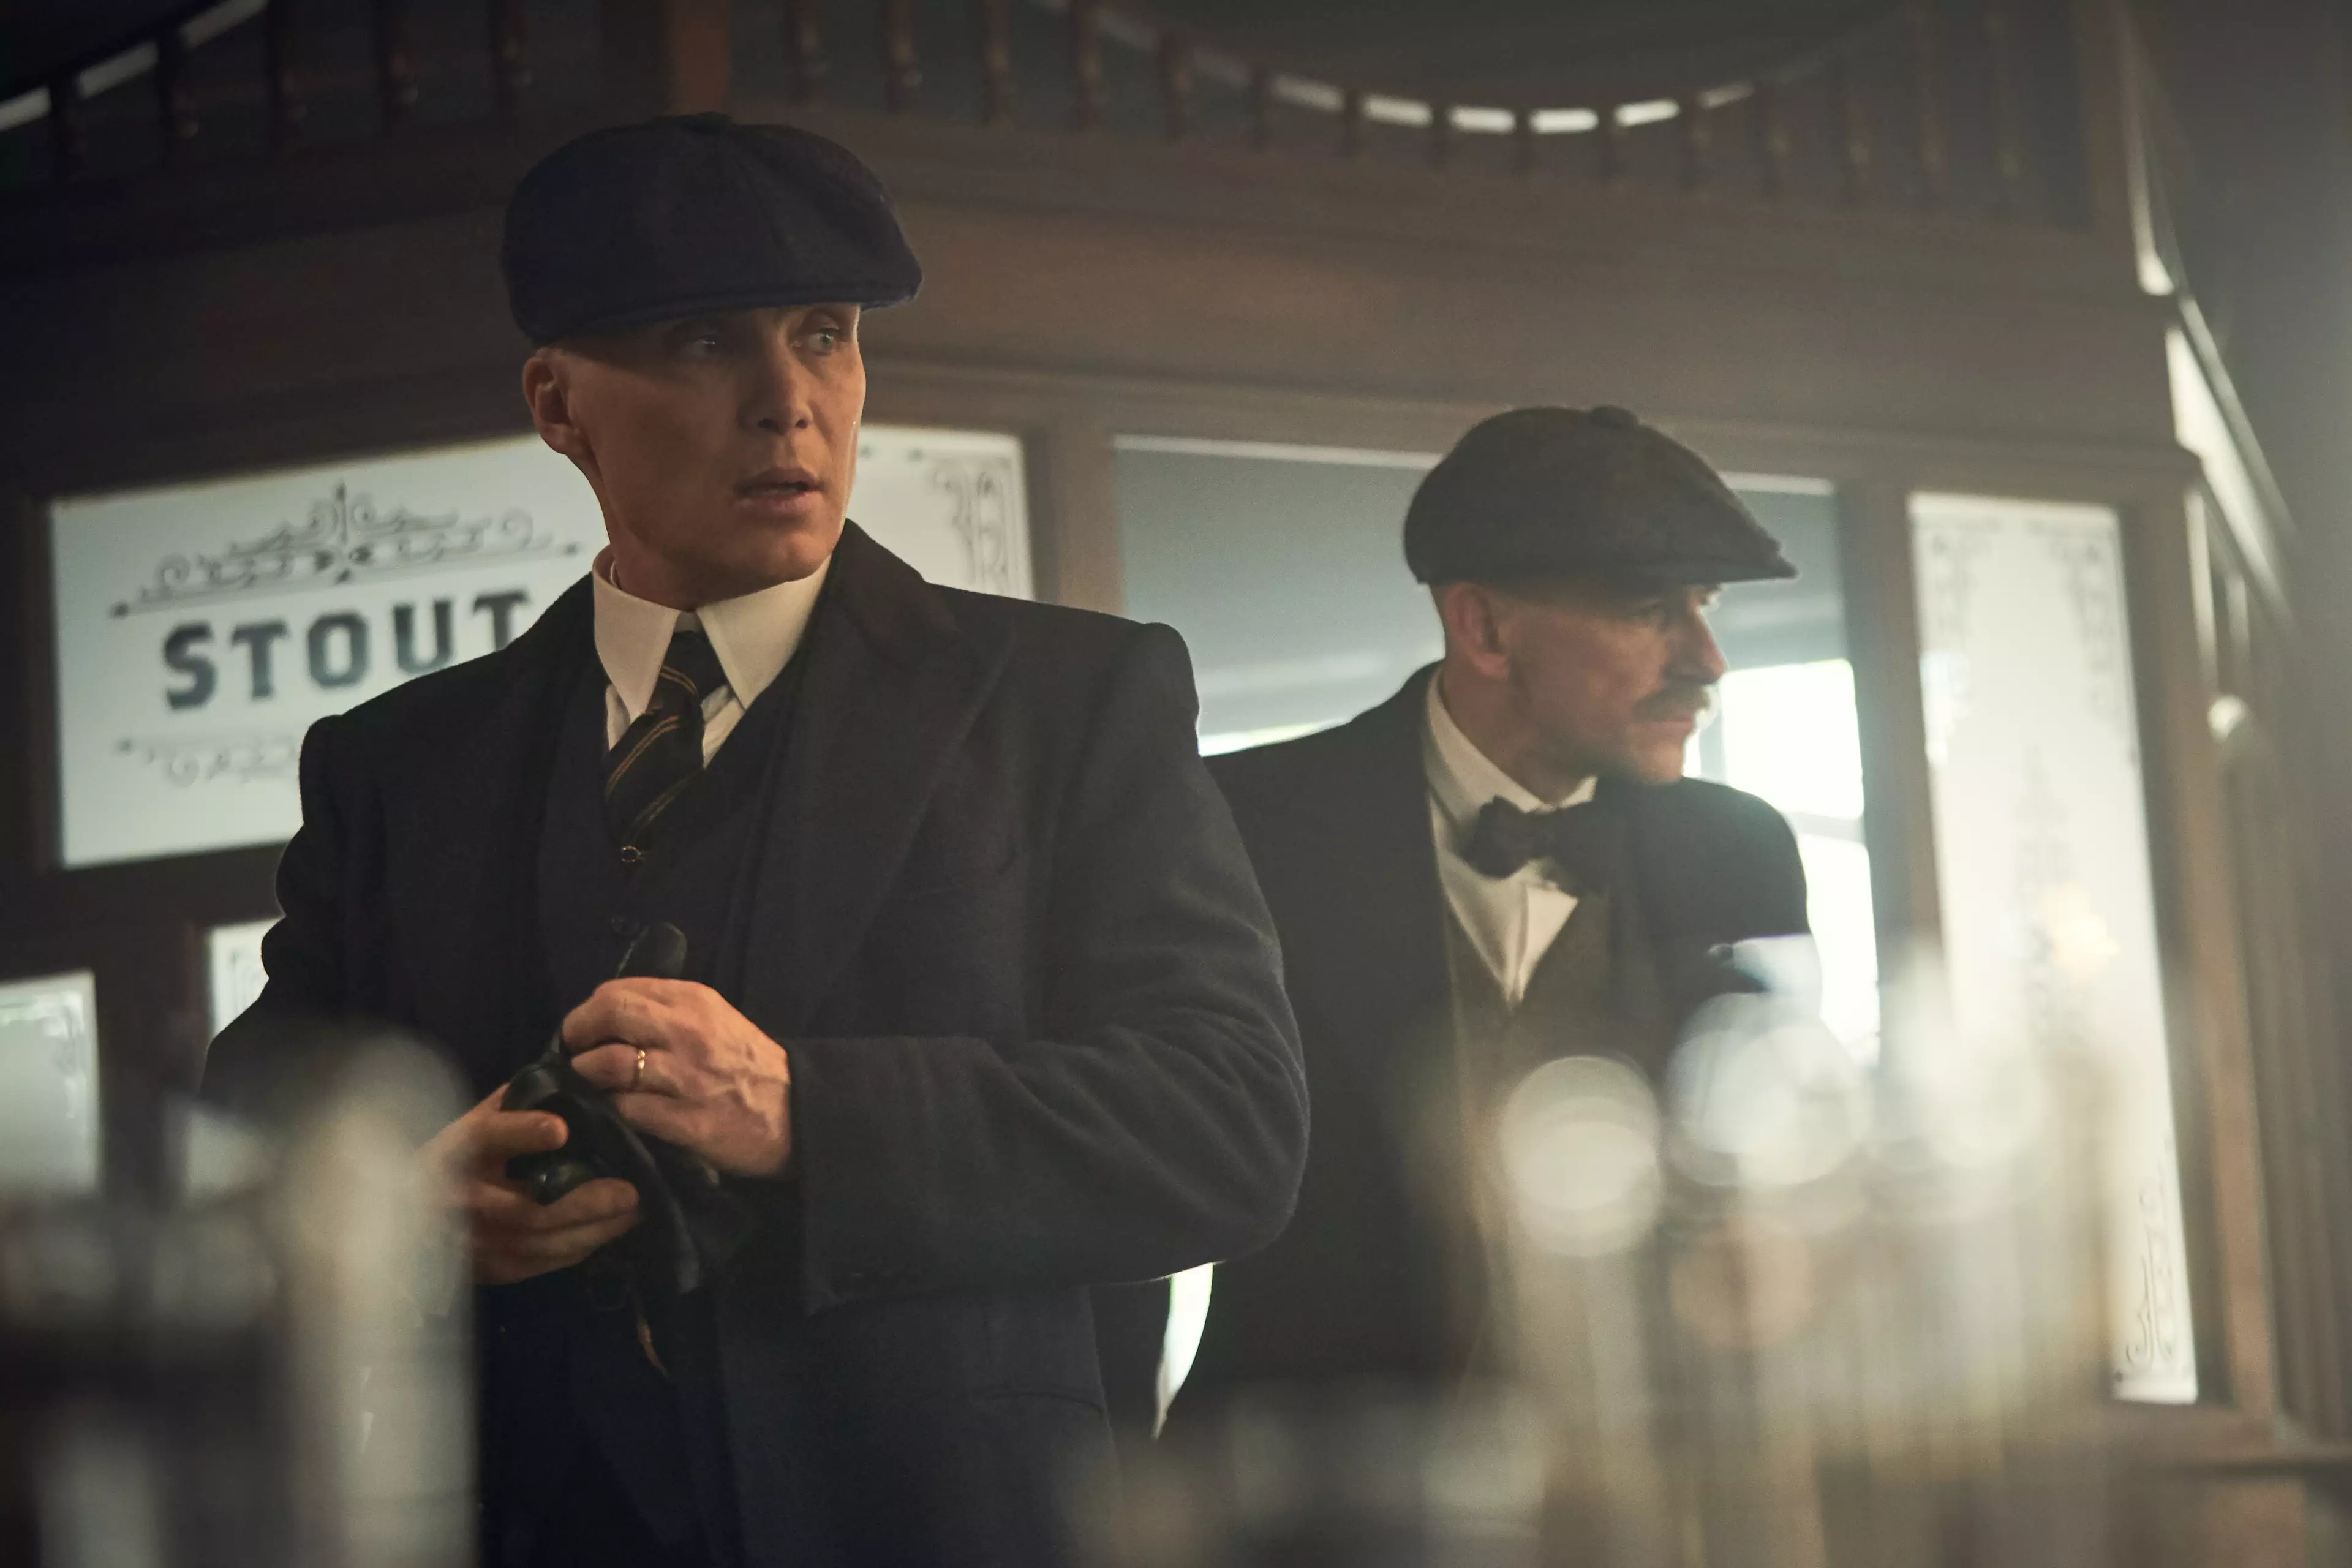 The first two episodes of the fifth season of Peaky Blinders will air on consecutive days.